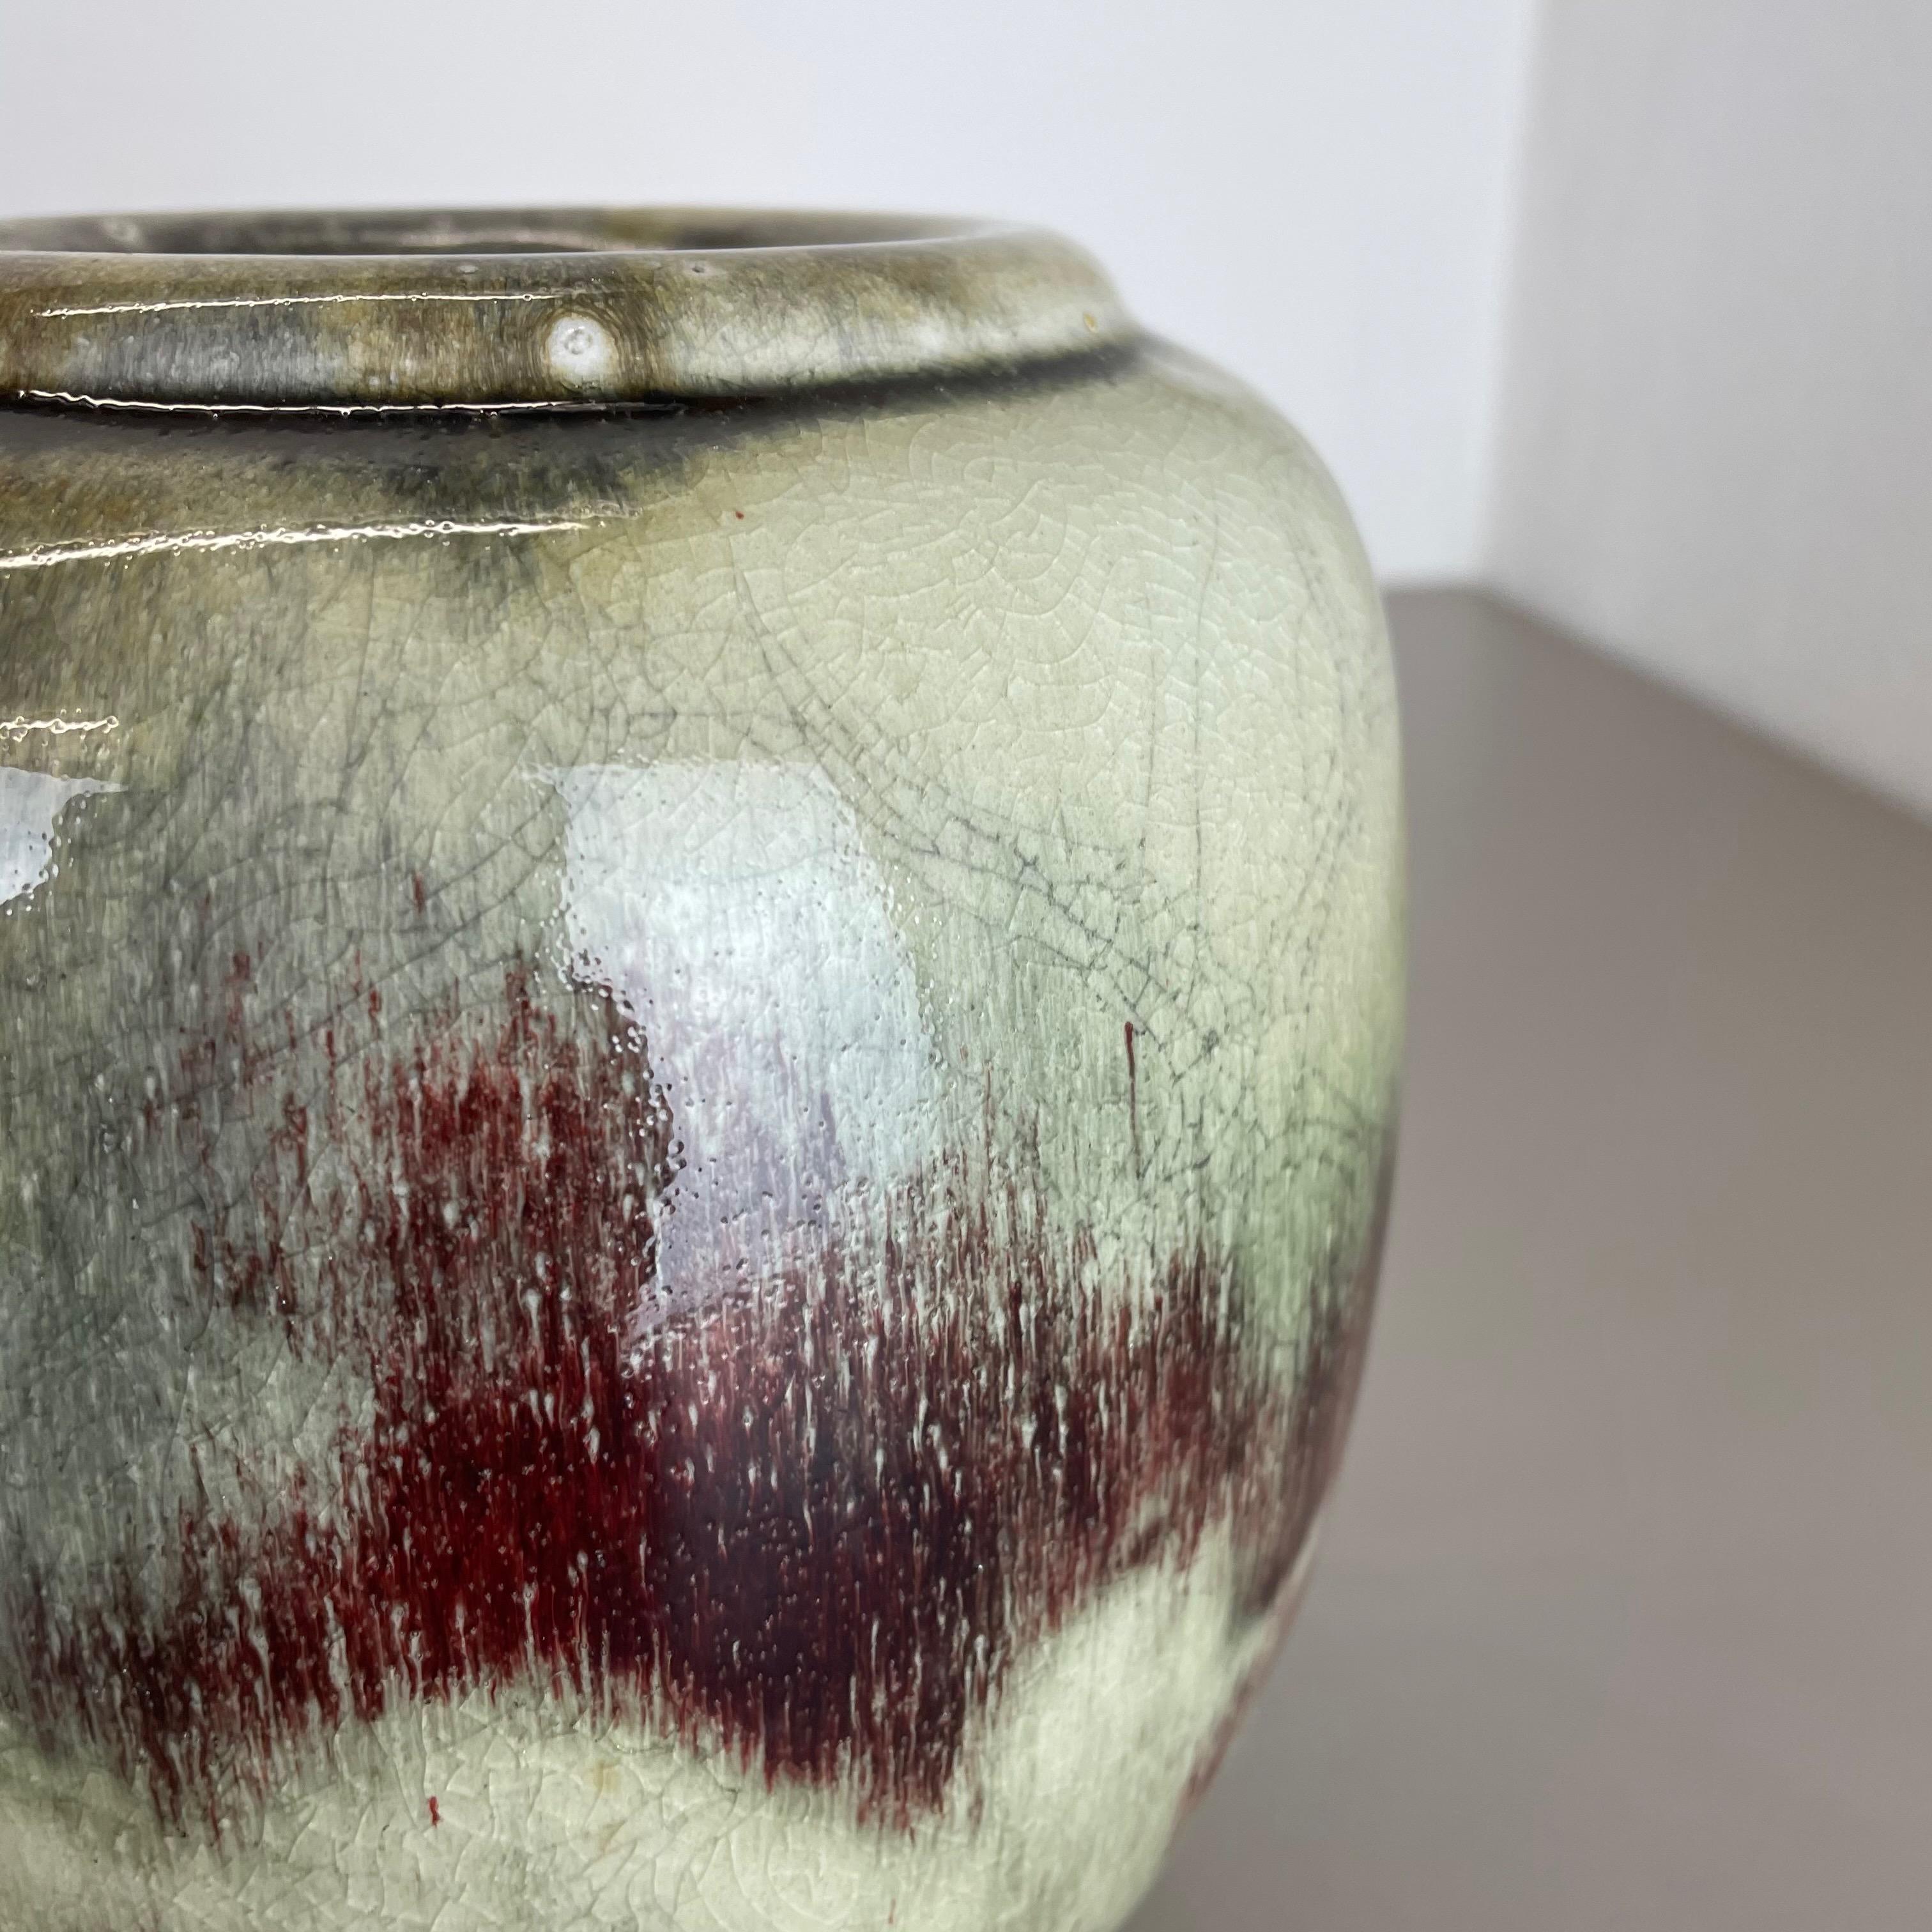 Ceramic Unique Abstract Bauhaus Vase Pottery by WMF Ikora, Germany 1930s Art Deco For Sale